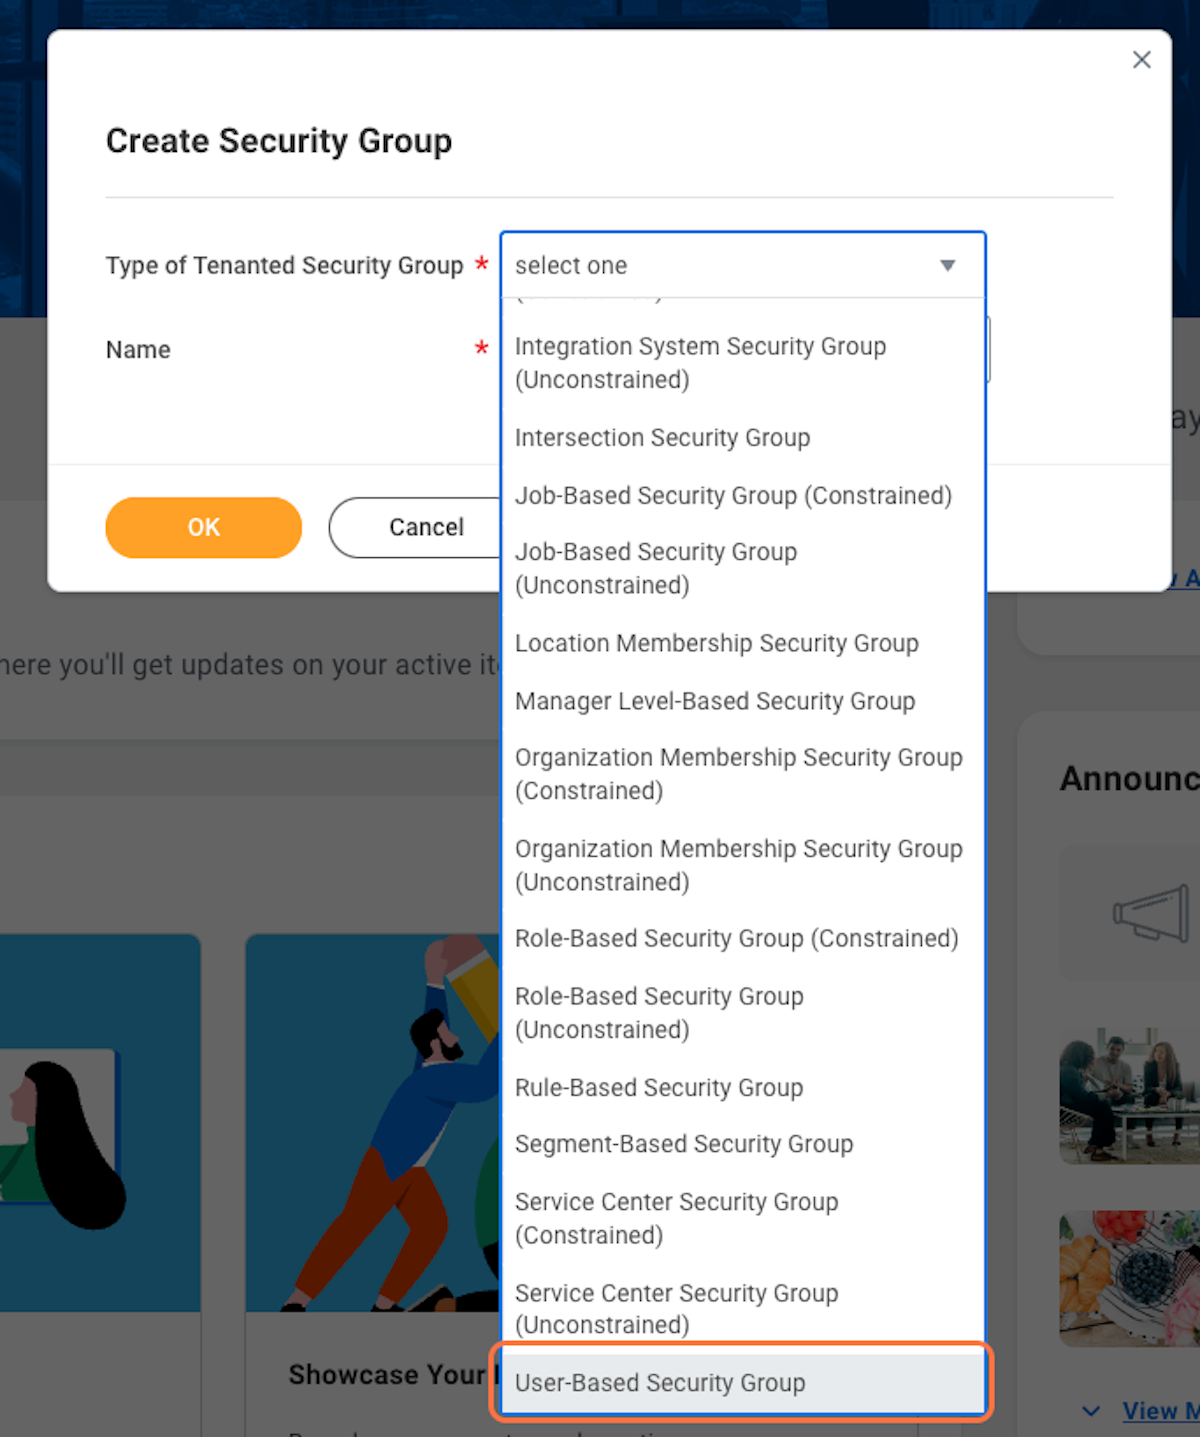 For "Type of Tenanted Security Group" select "User Based Security Group"